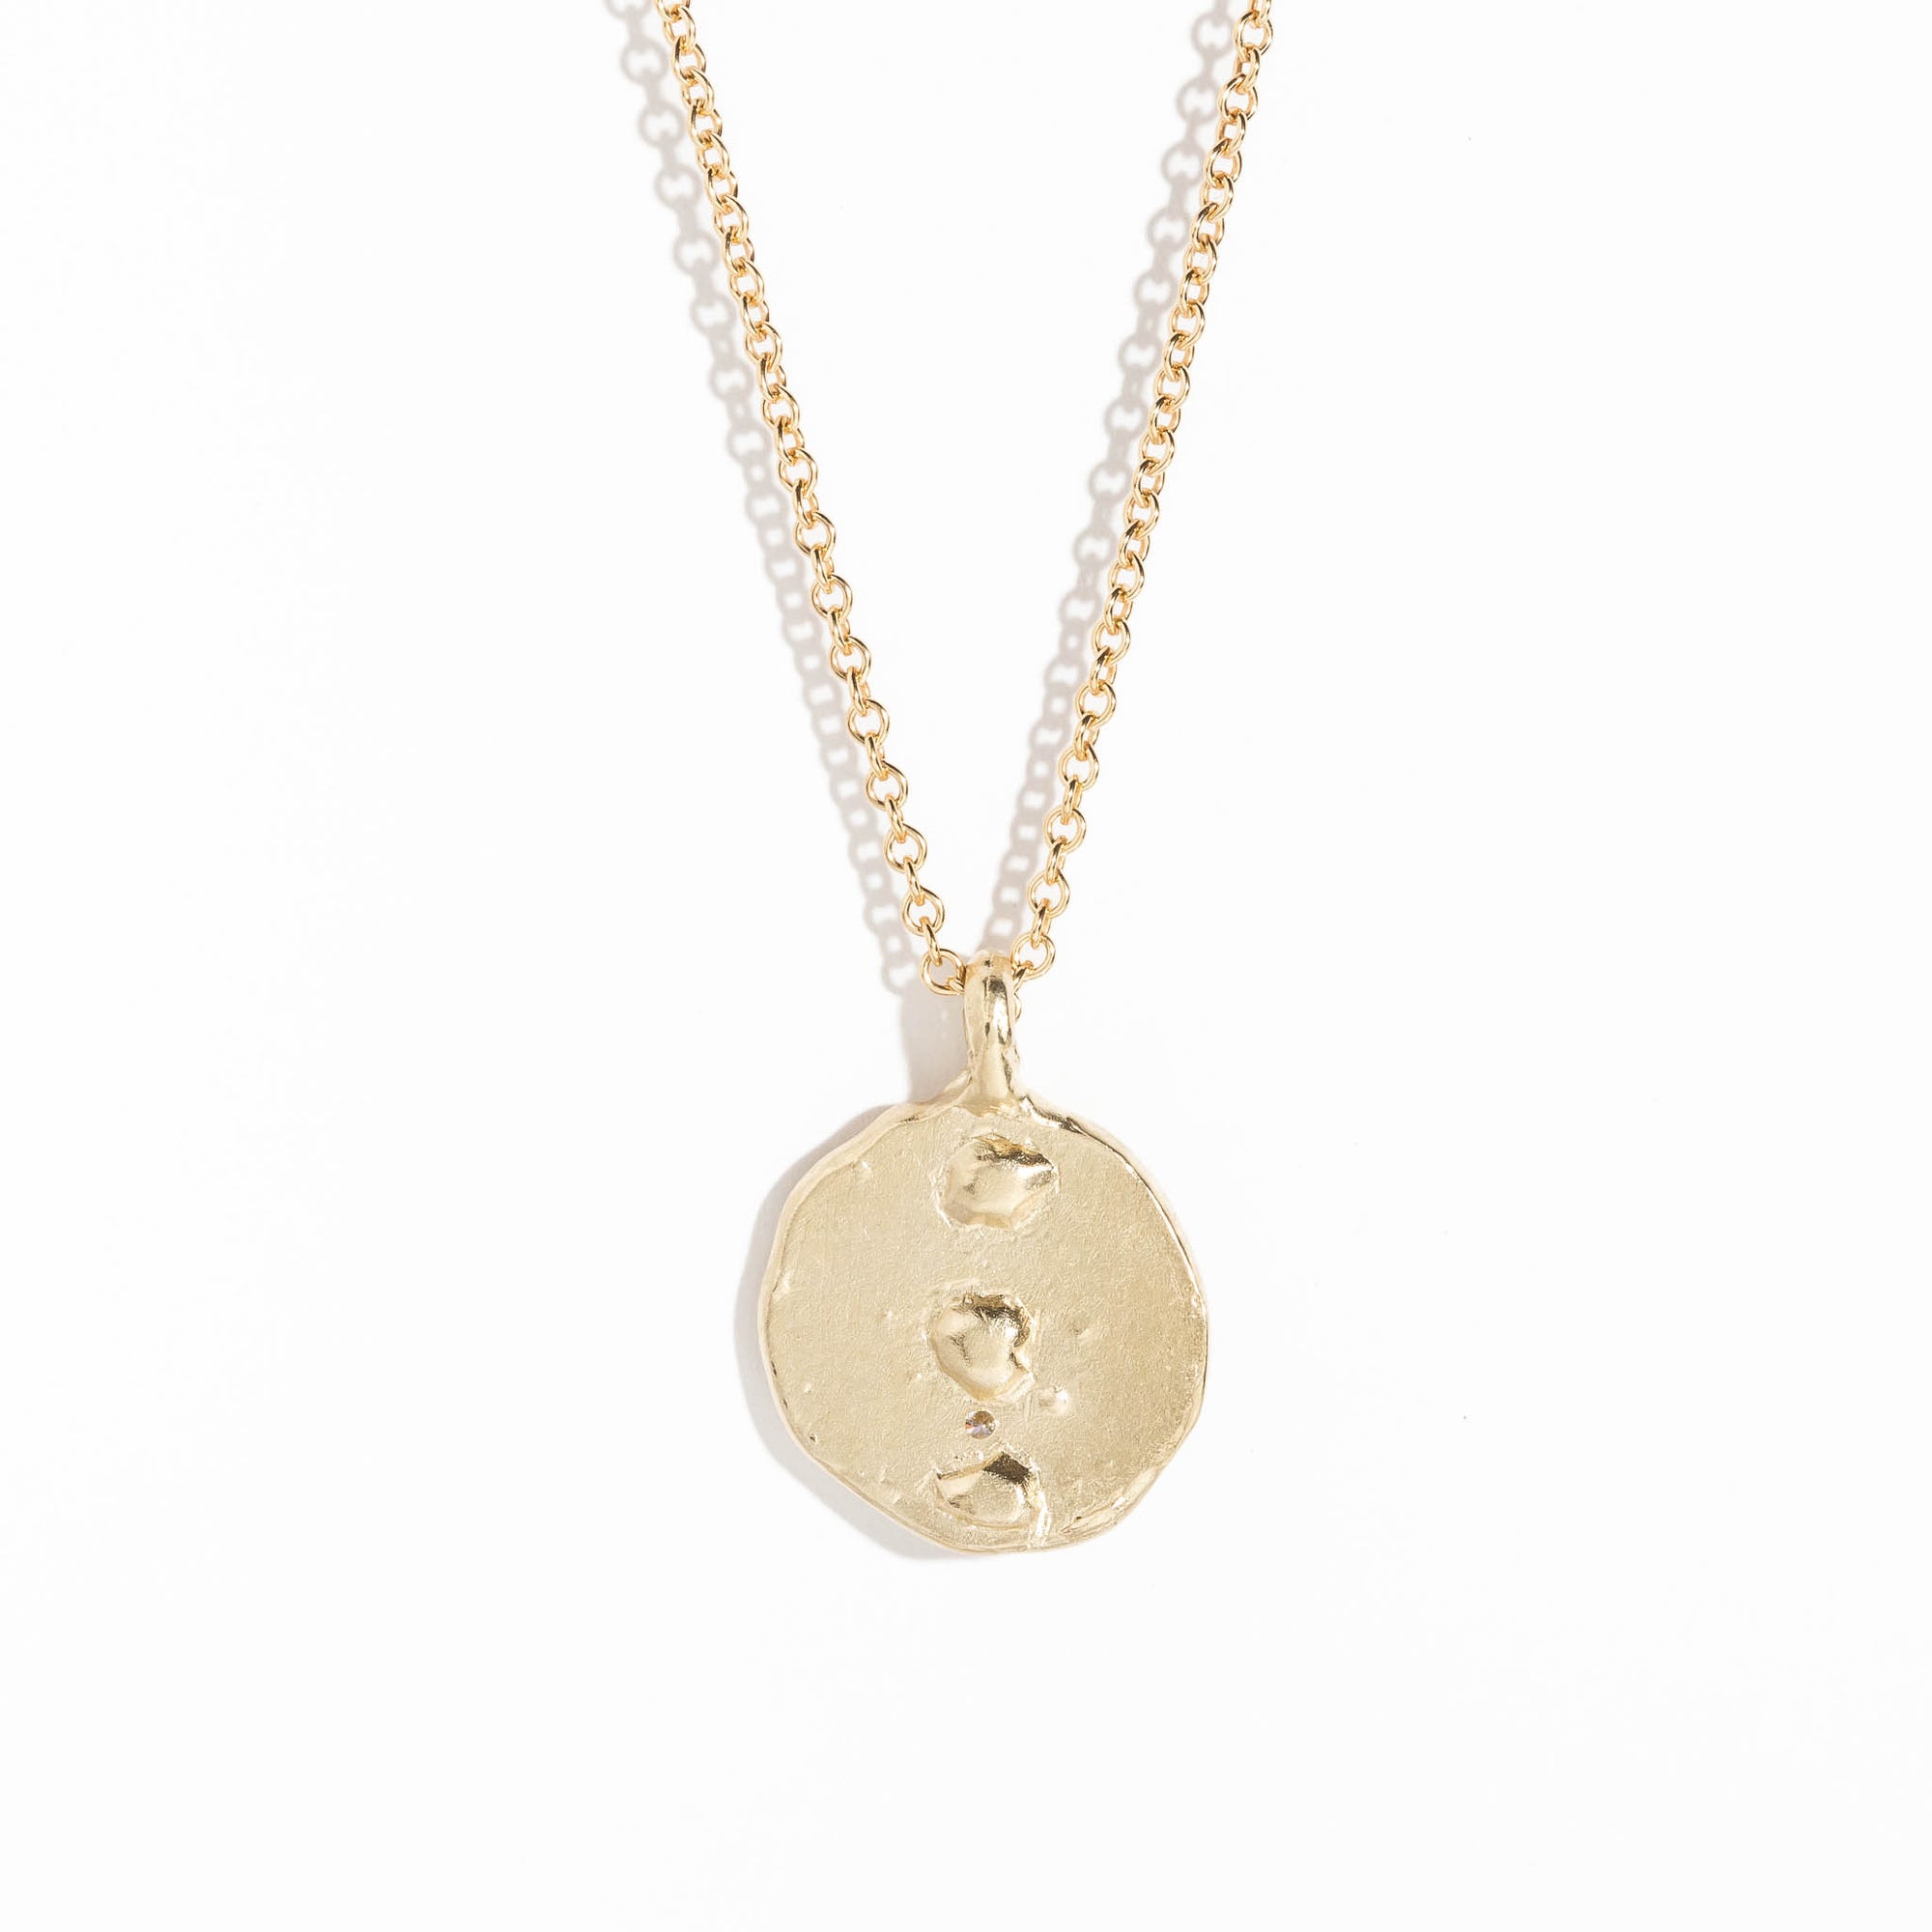  Round Pendant with Diamonds in 9 Carat Yellow Gold 